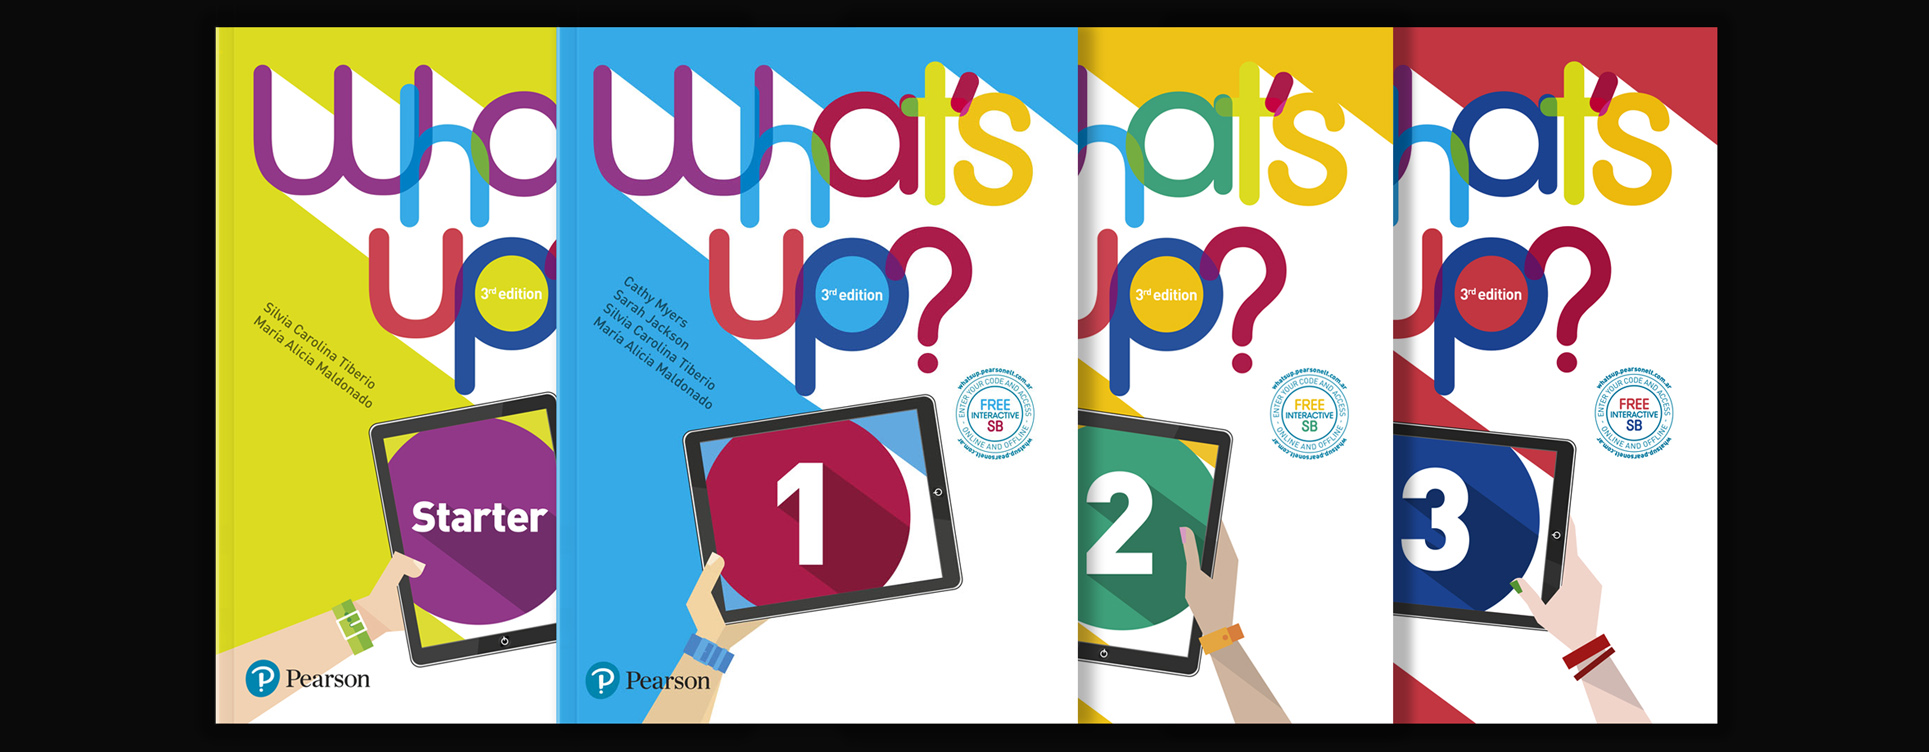 What’s Up? 3rd Edition - Serie completa